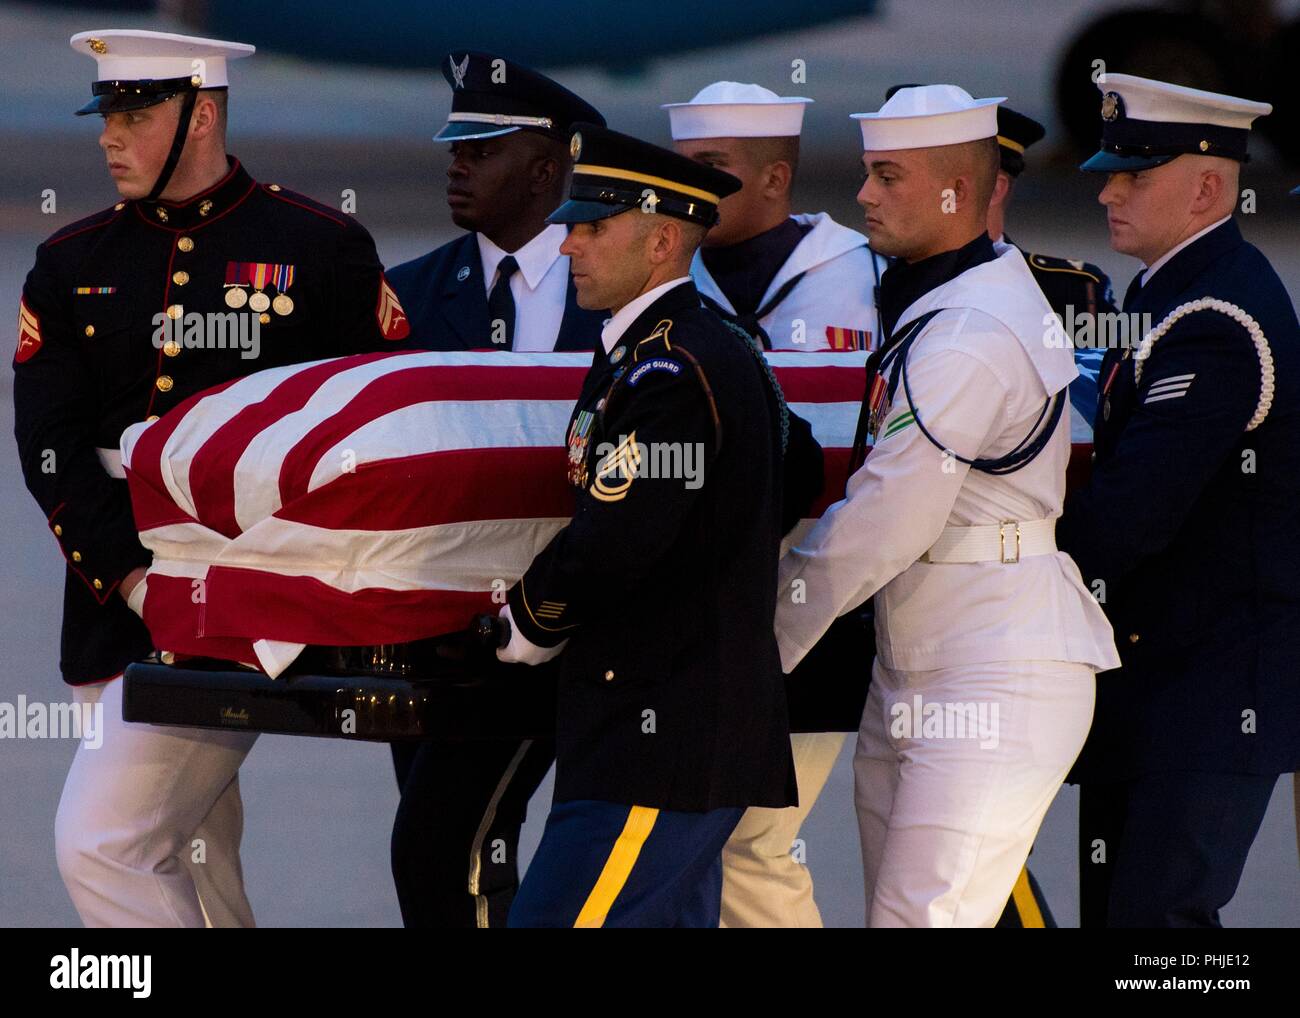 A U.S. Military Joint Service honor guard carries the flag-draped casket of Sen. John S. McCain III after arrival from Arizona August 30, 2018 at Joint Base Andrews, Maryland. The former senator’s remains are en route to lie in state in the U.S. Capitol Rotunda before burial at the U.S. Naval Academy. Stock Photo